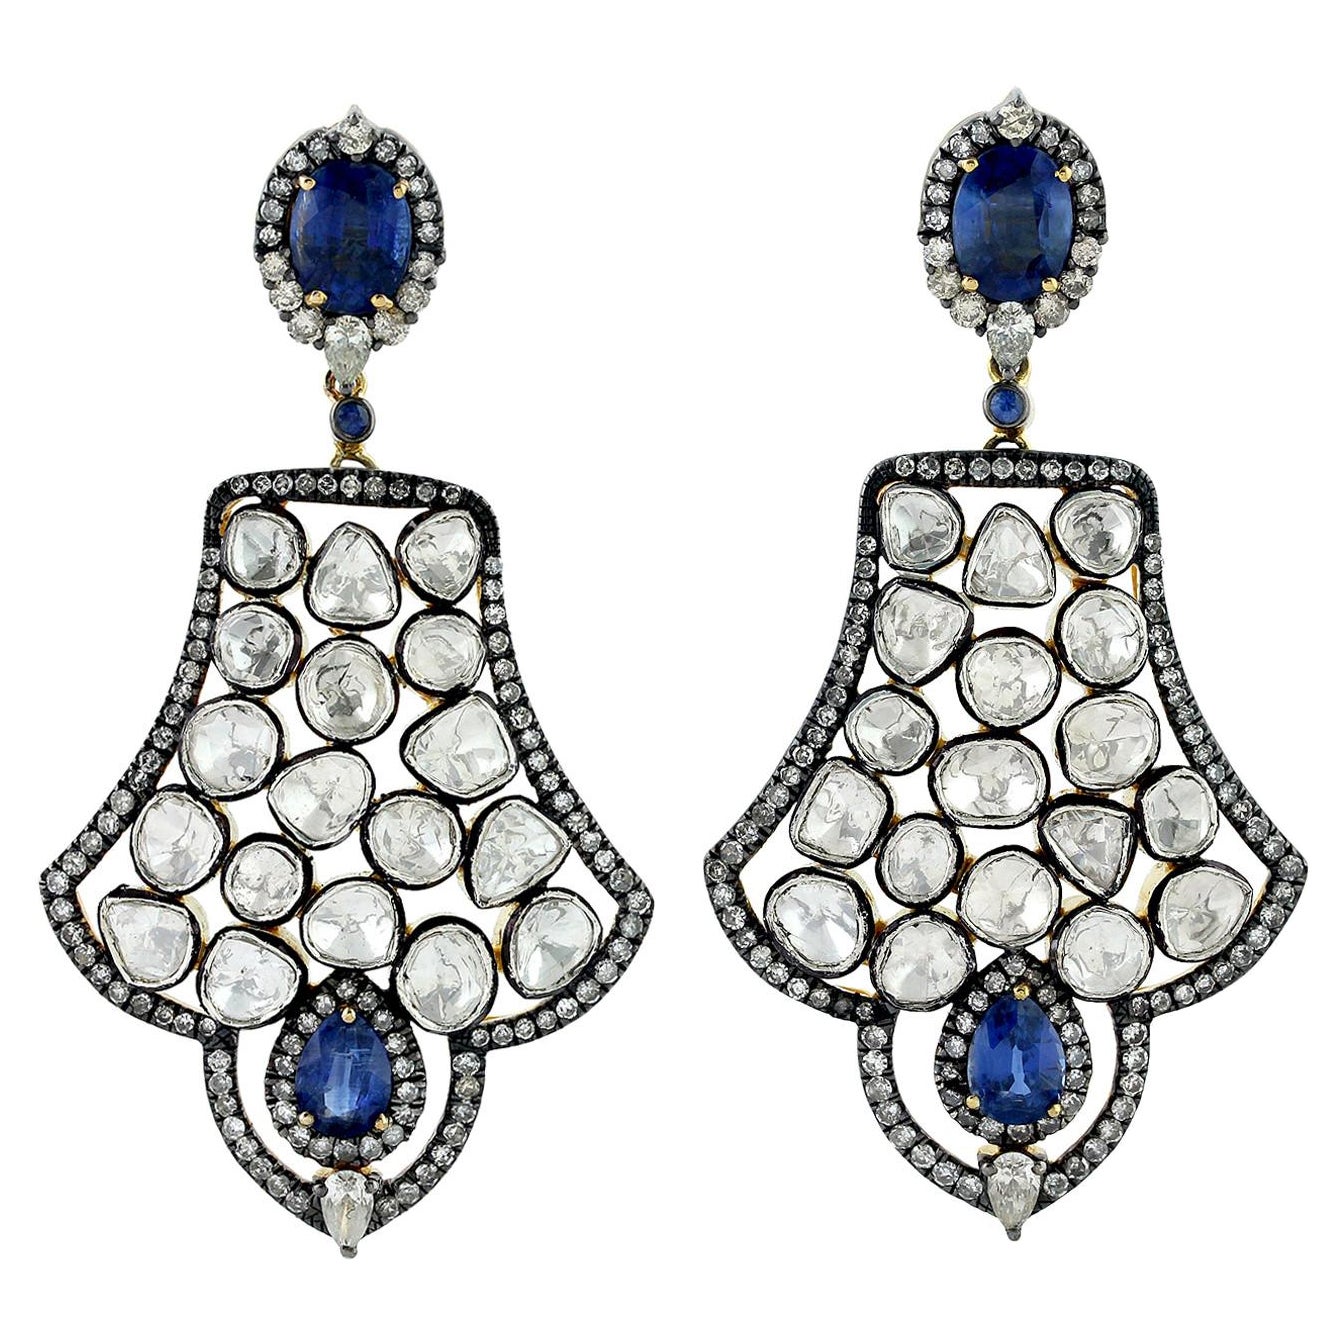 Rose Cut Diamonds Earrings with Kyanite & Sapphire Made in 18k Gold & Silver For Sale